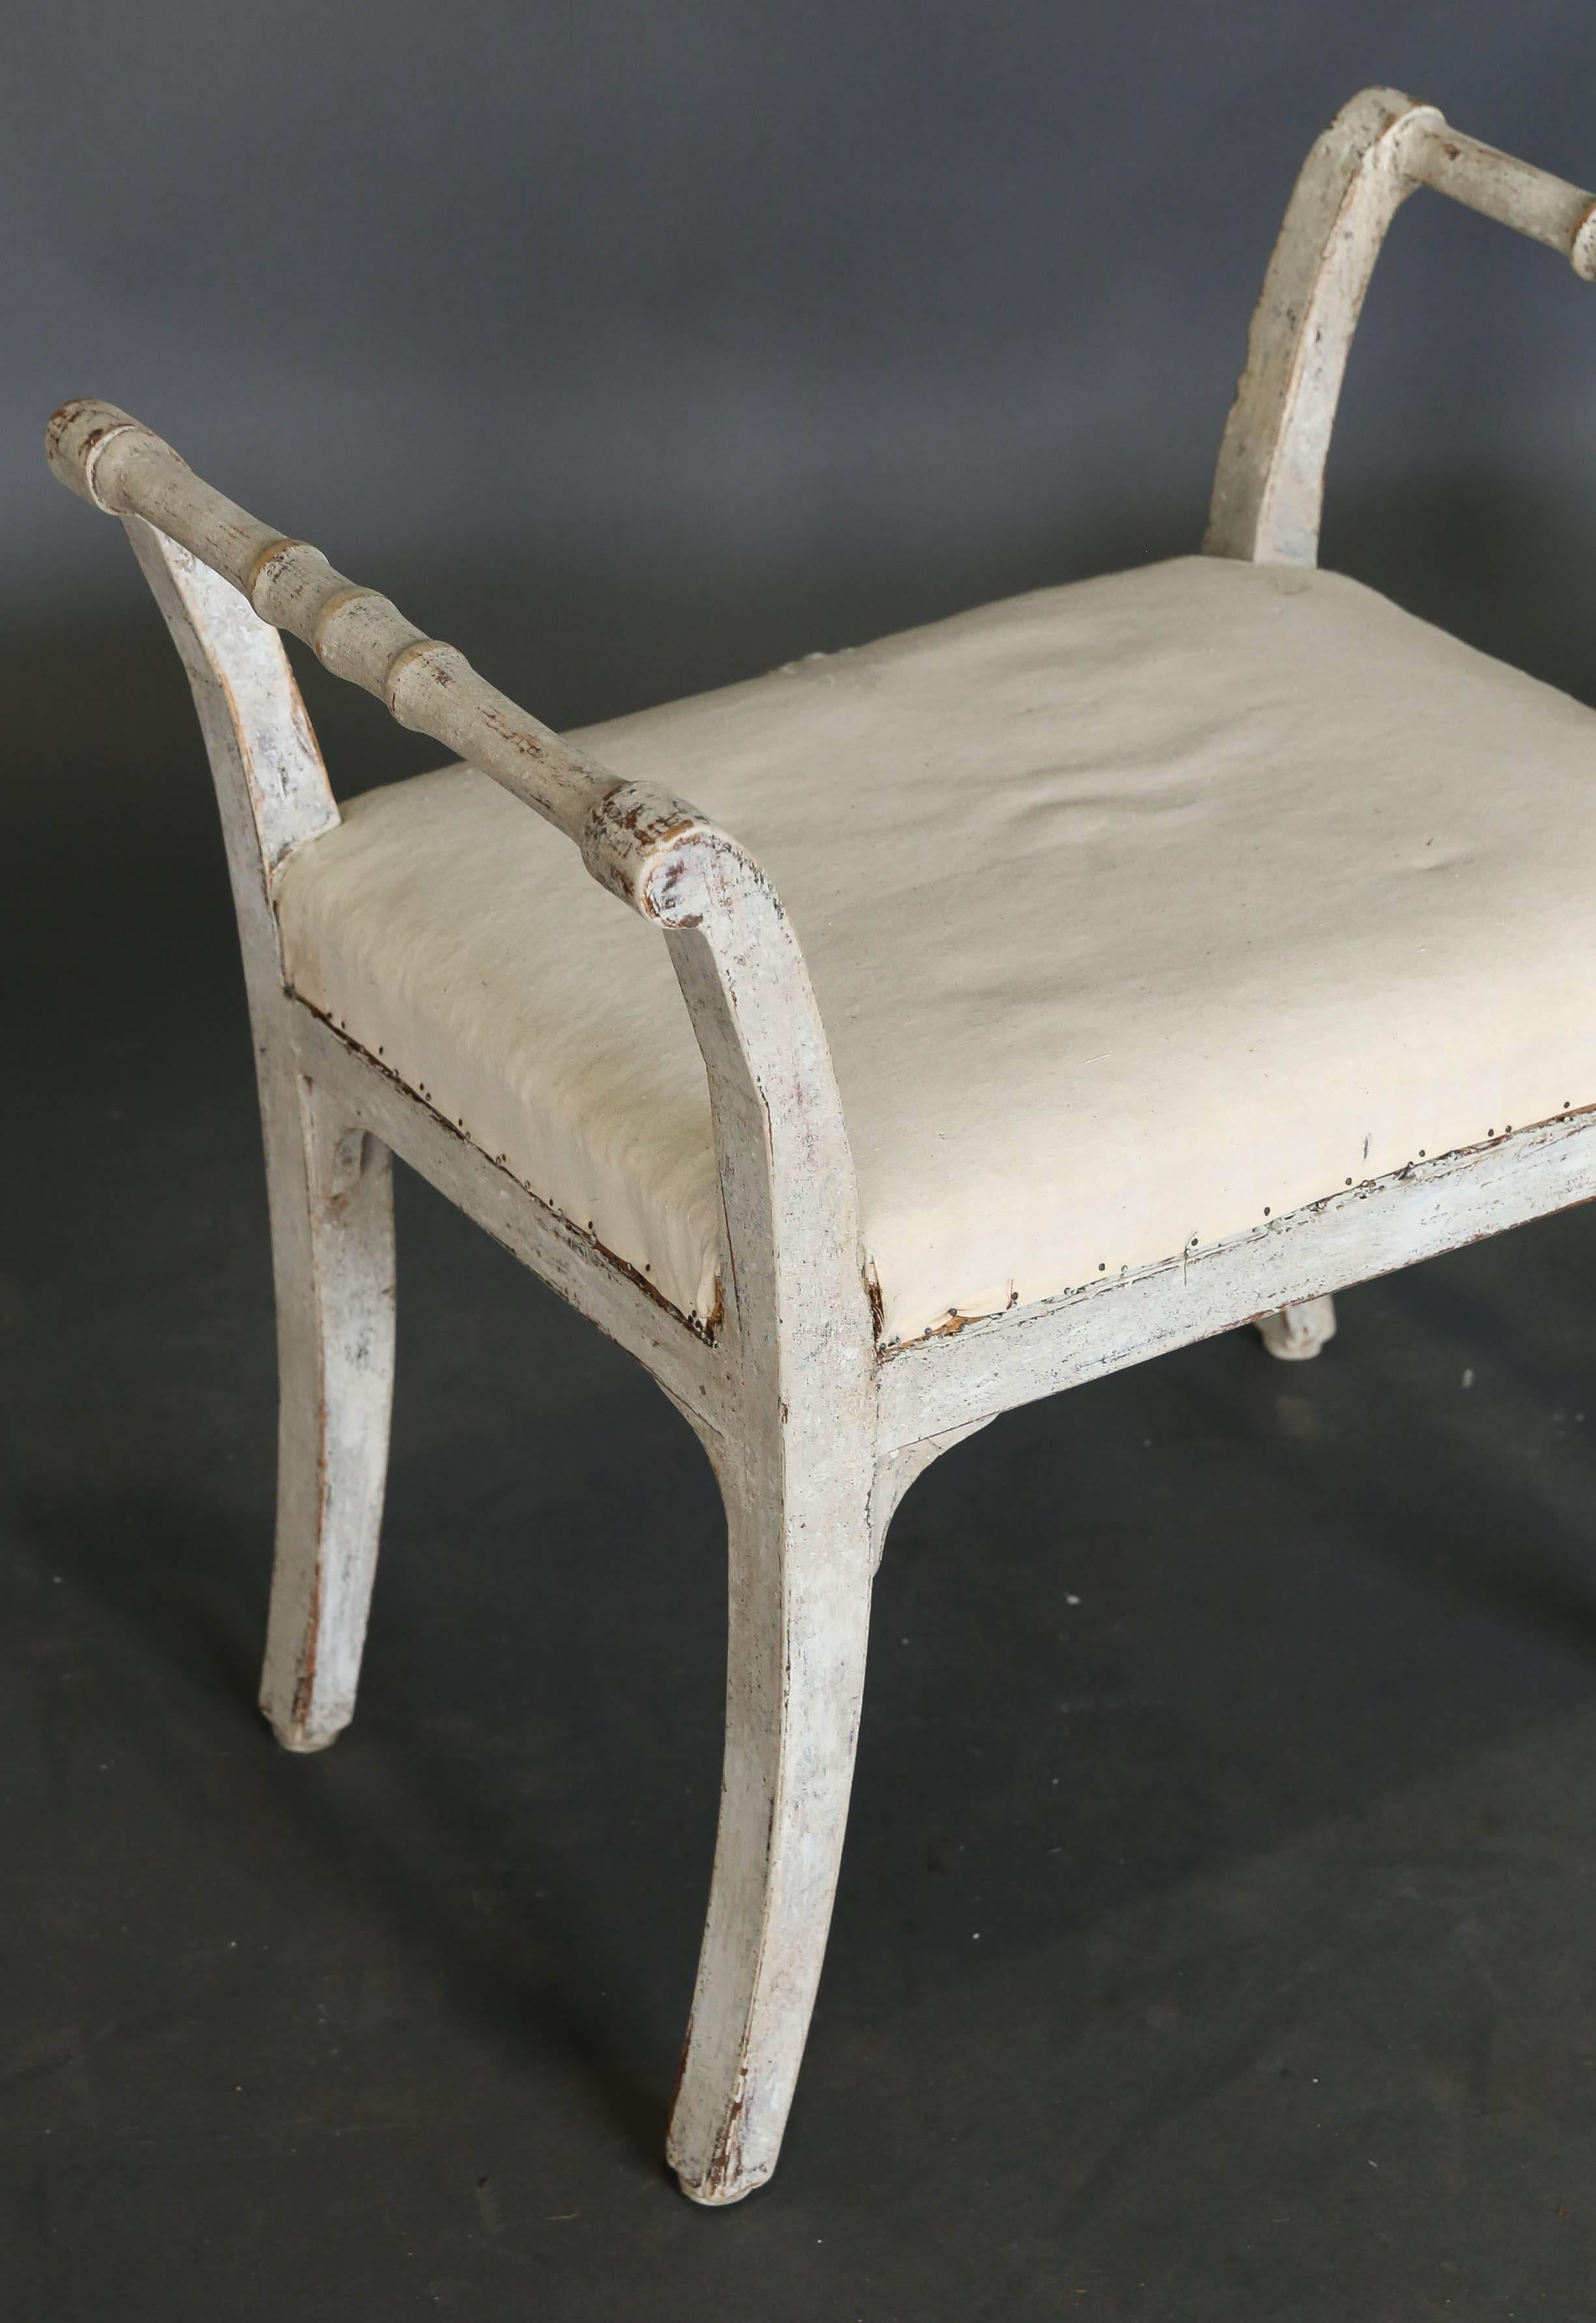 Pair of 19th century upholstered Swedish Benches or Stools with slightly saber legs and rounded detail on the arms.